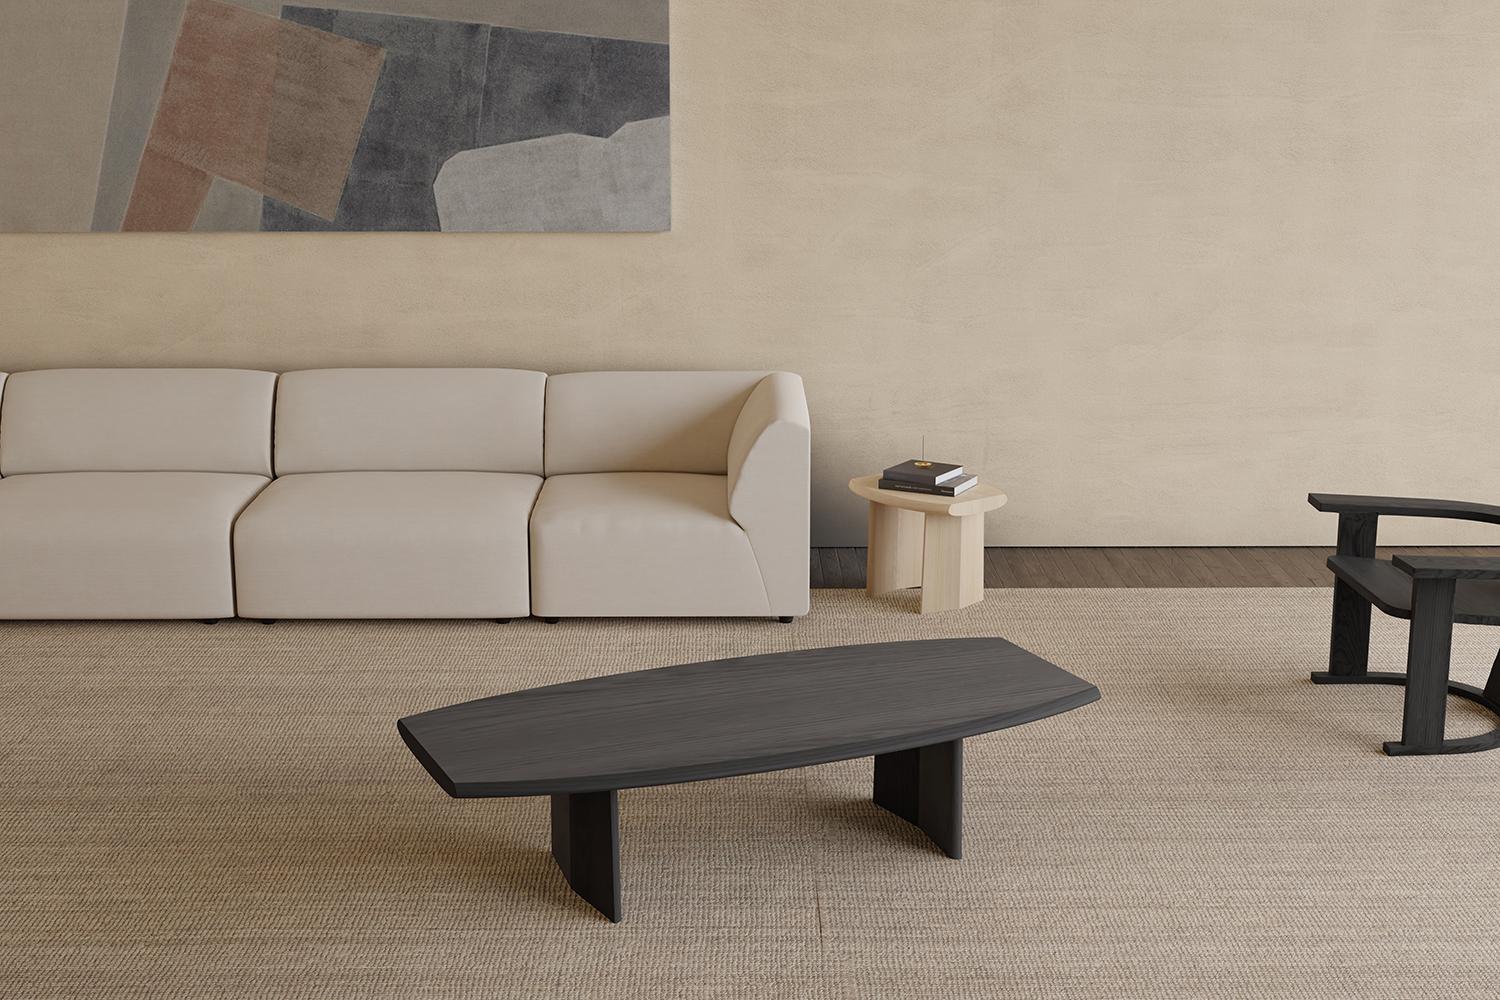 Peana Coffee Table, Bench in Black Tinted Solid Wood Finish by Joel Escalona

Peana, which in English translates to base or pedestal, is a series of tables and different surfaces inspired by the idea of creating worthy furniture pieces to place and